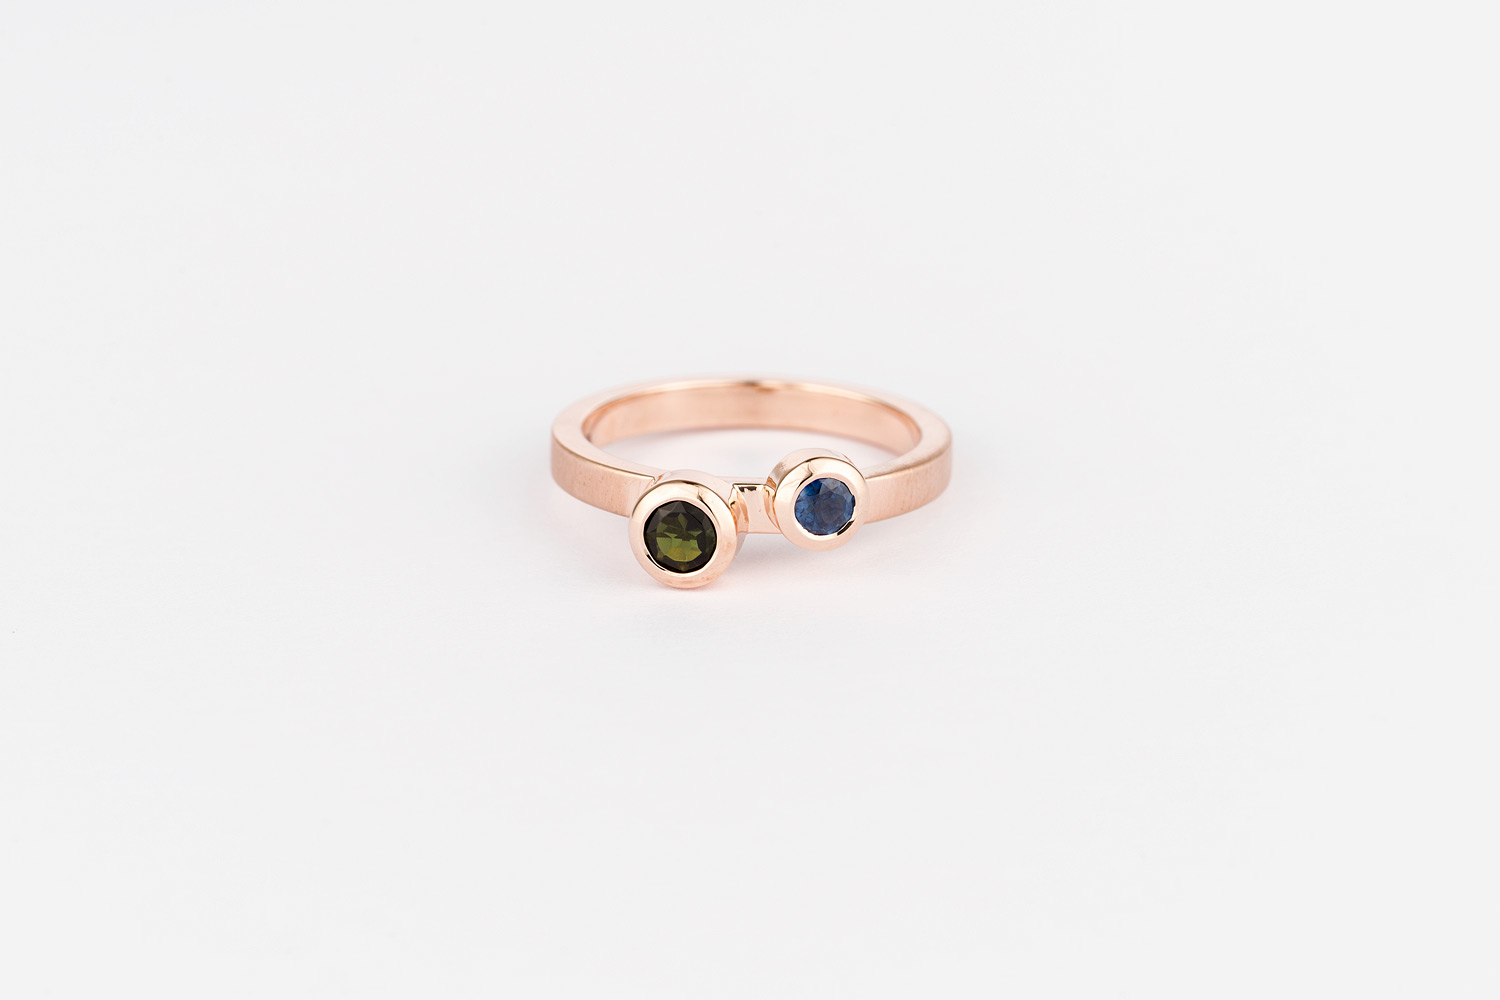  9ct rose gold / tourmaline and sapphire ring 